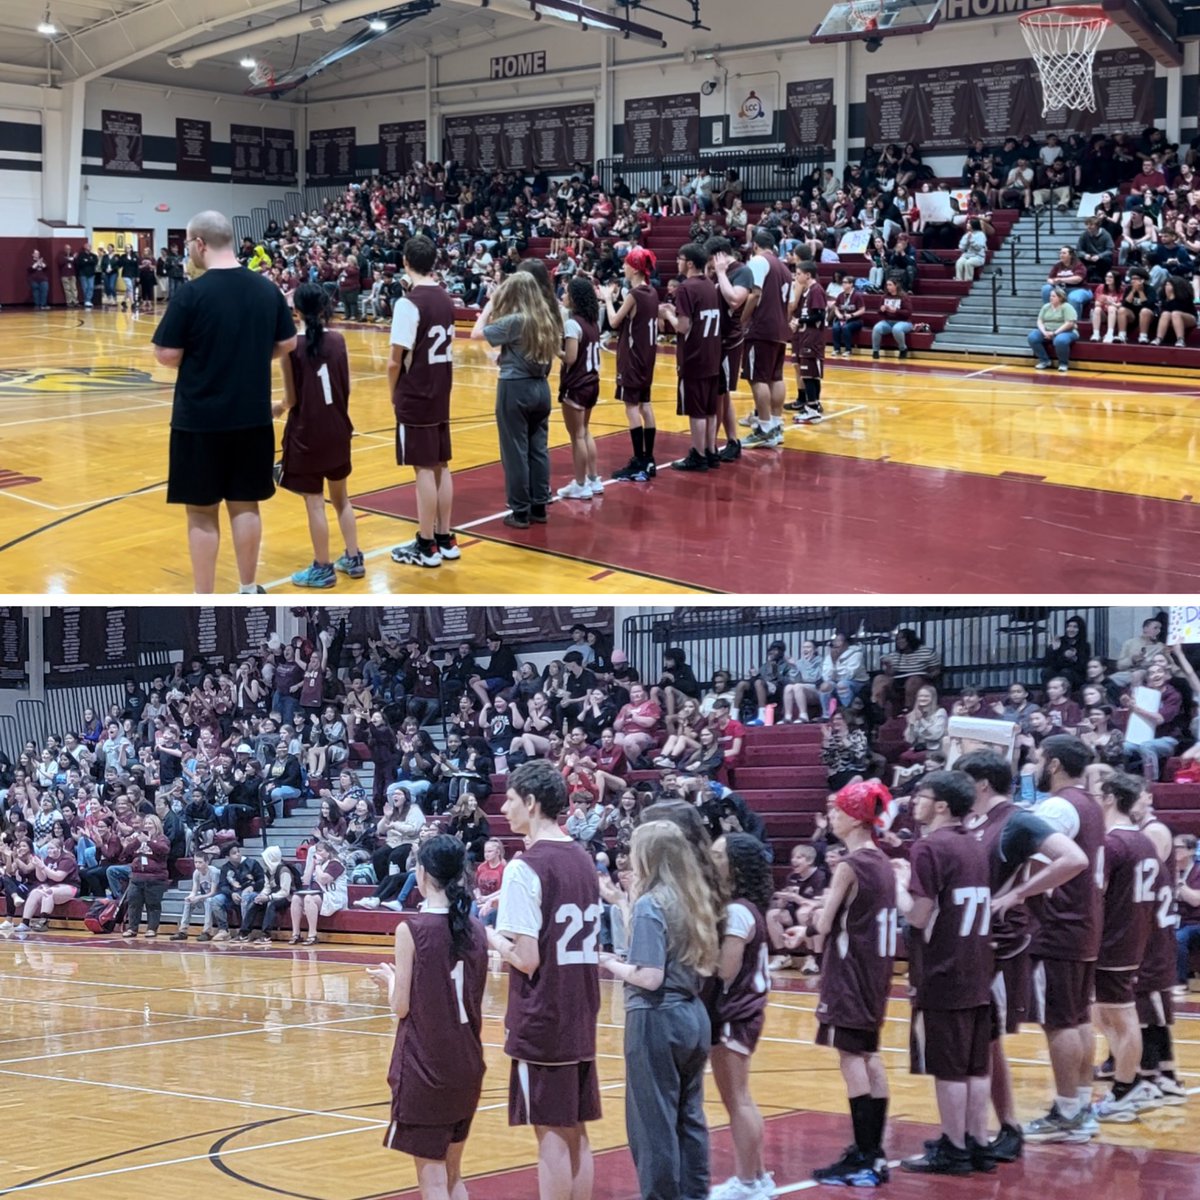 HUGE shout out to @goLYLIONS @DrMatthew_Barr. Today’s assembly game was perfect with so much support from so many students and an amazing atmosphere. @NewarkCSD @SpecOlympicsNY @UnifiedSportsNY @sectionvunified